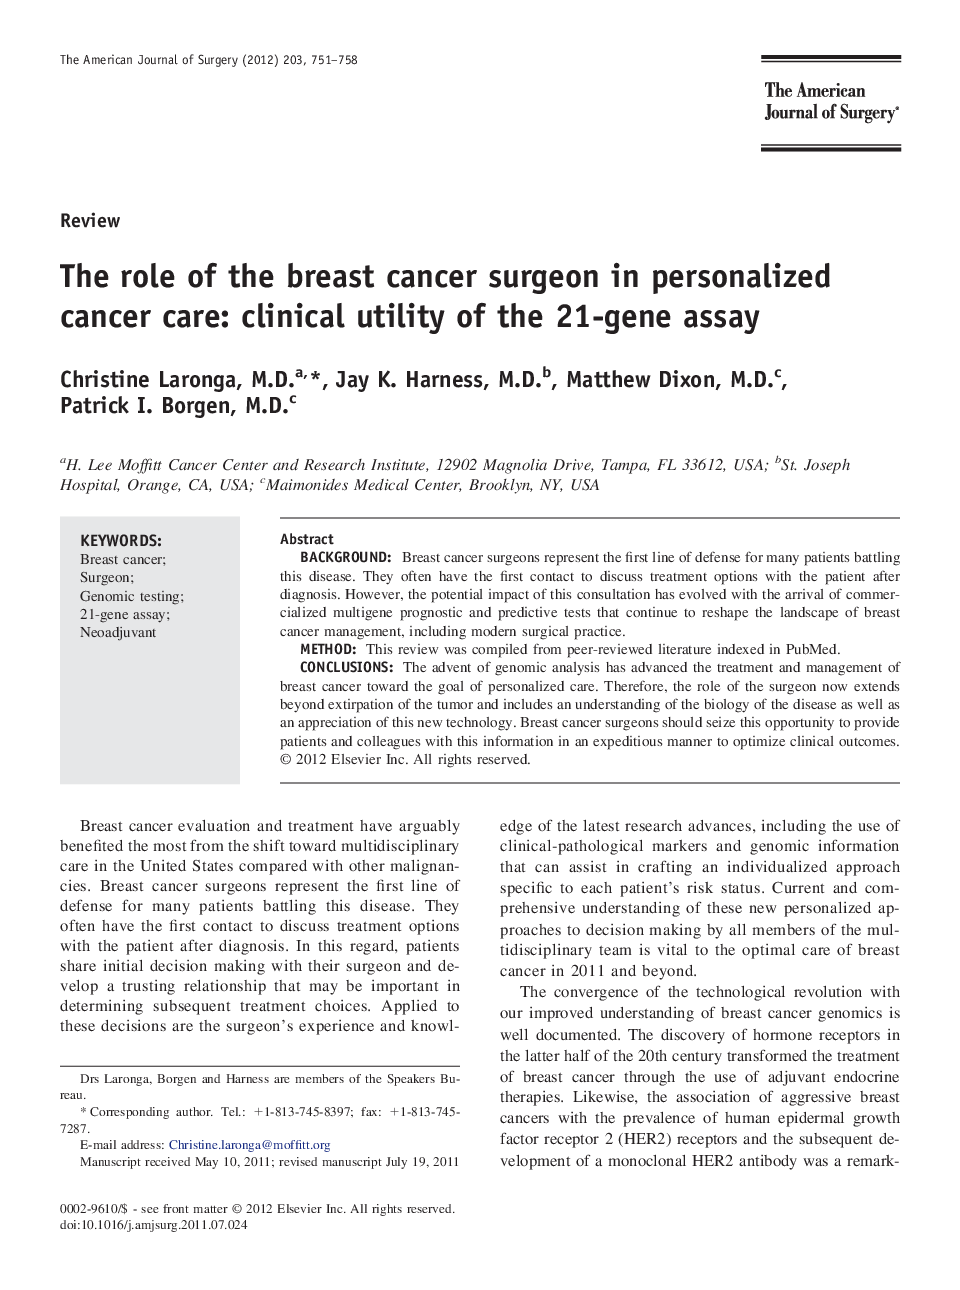 The role of the breast cancer surgeon in personalized cancer care: clinical utility of the 21-gene assay 